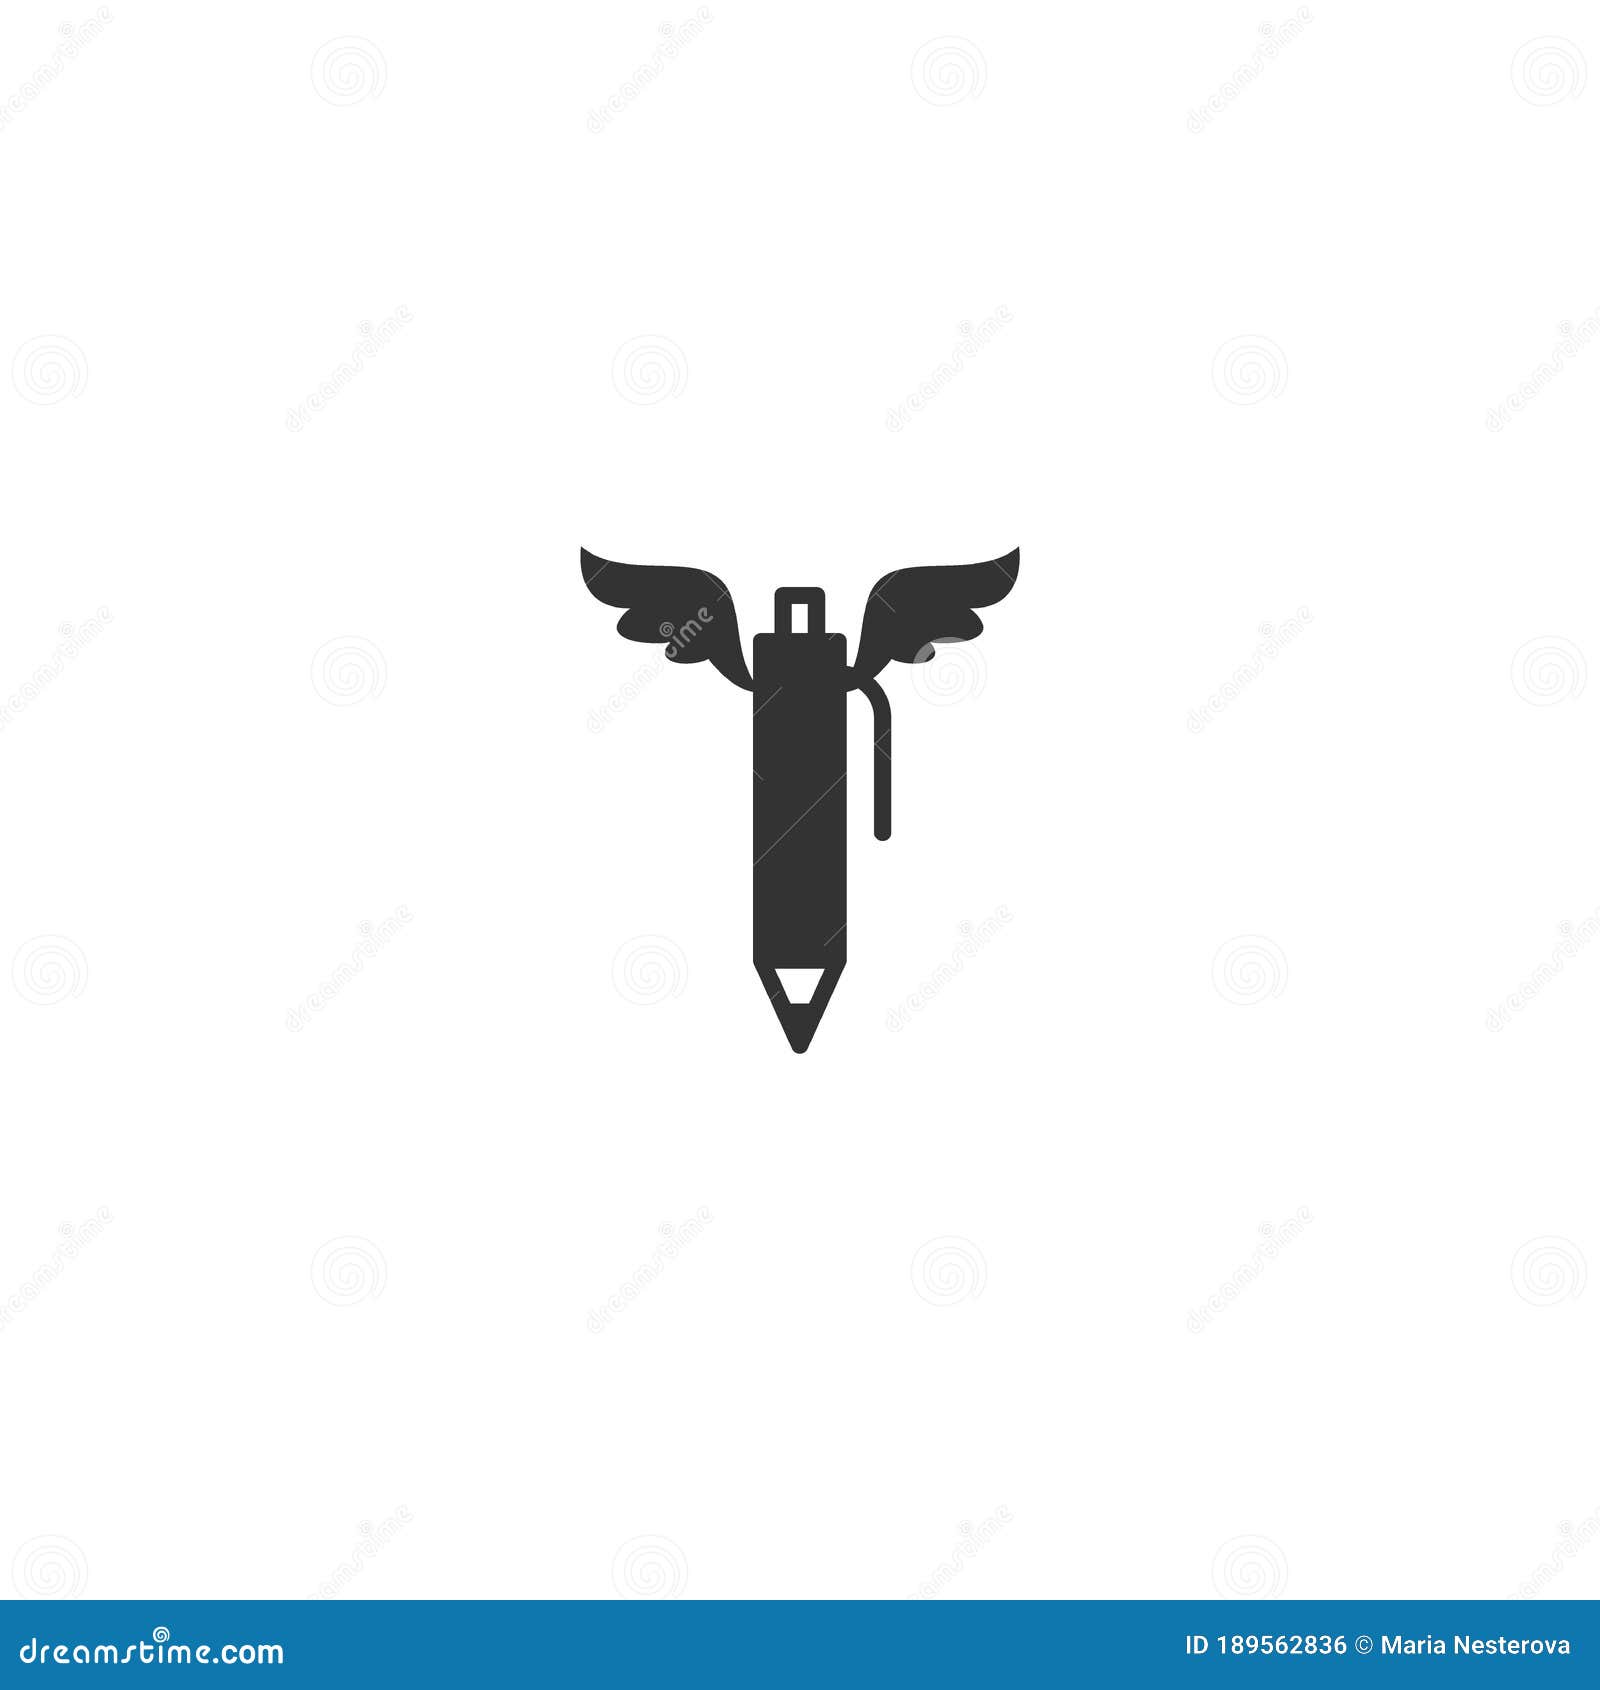 https://thumbs.dreamstime.com/z/black-pen-wings-flat-icon-isolated-white-vector-illustration-pencil-creativity-sign-creative-idea-symbol-wright-message-189562836.jpg